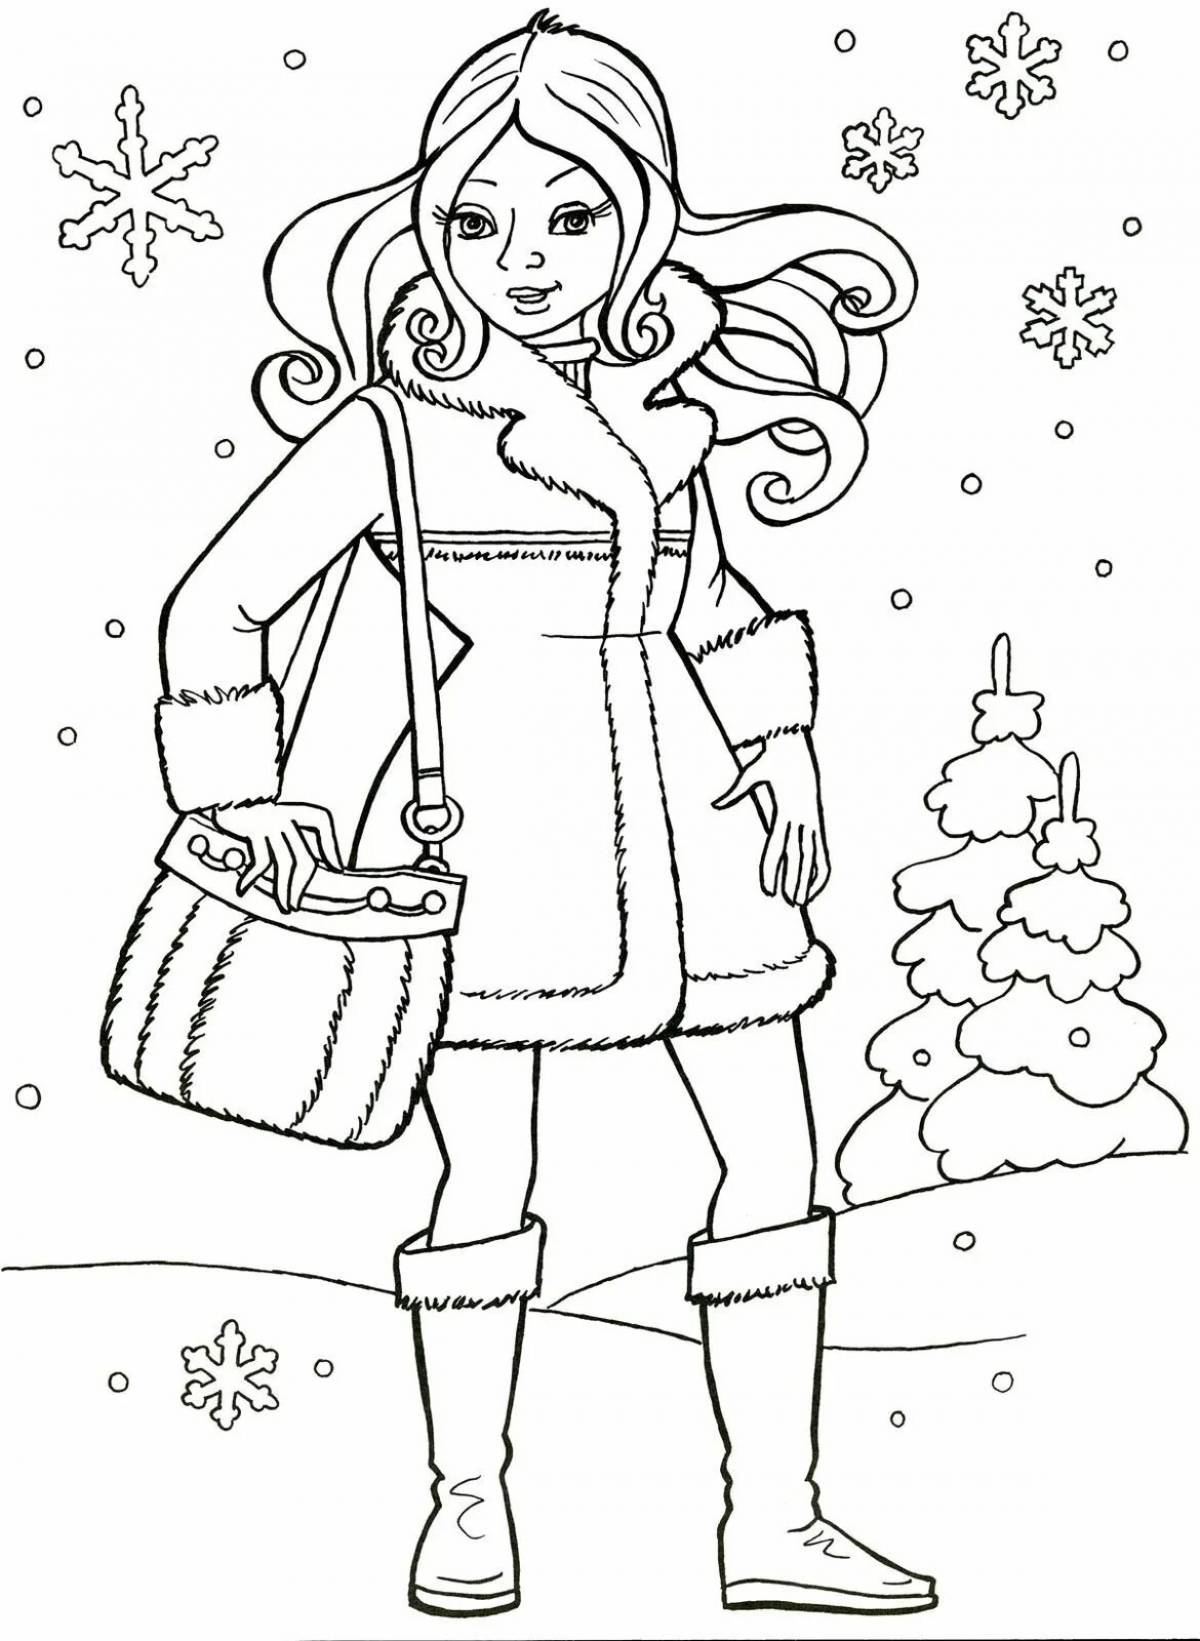 Fascinating winter coloring book for girls